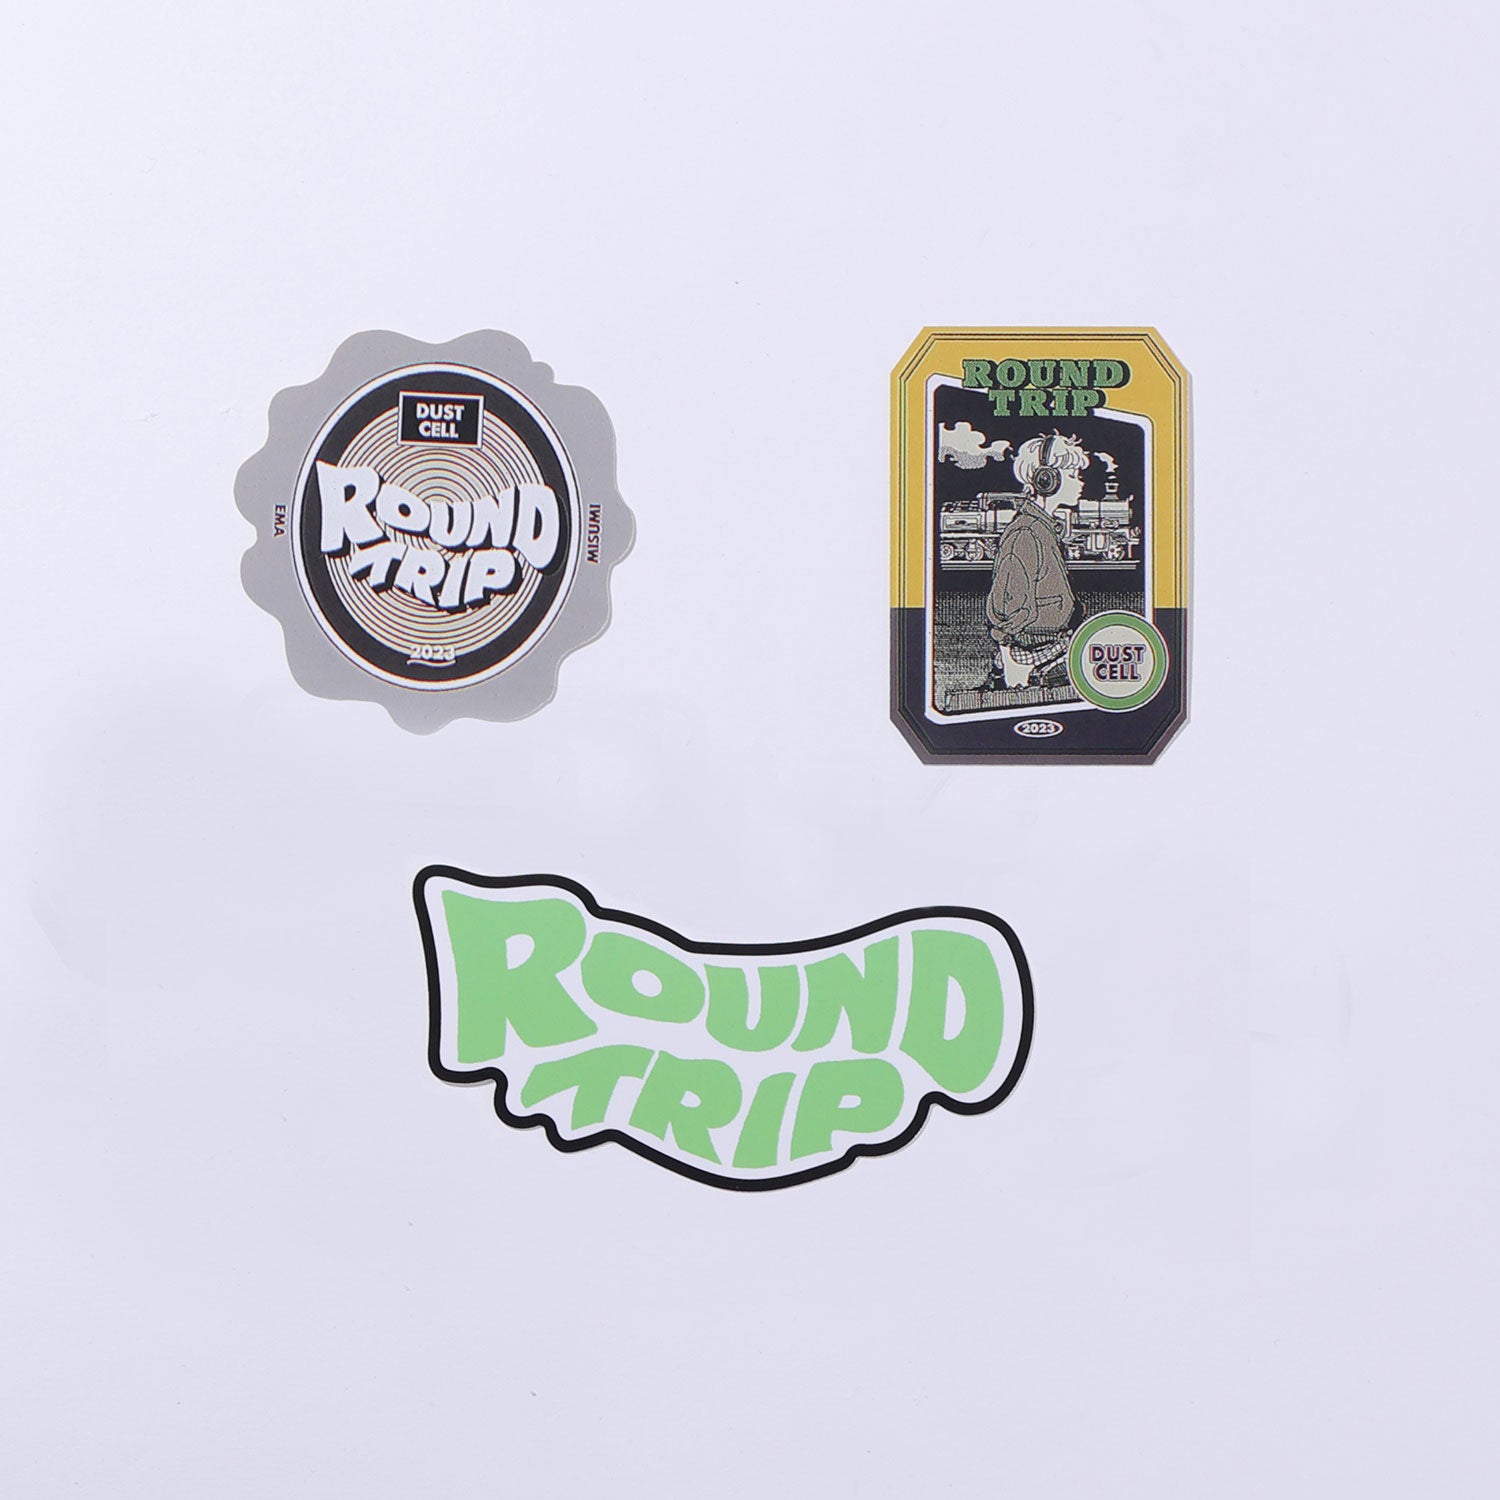 DUSTCELL】ステッカー3枚セット／TOUR「ROUND TRIP」 – FINDME STORE